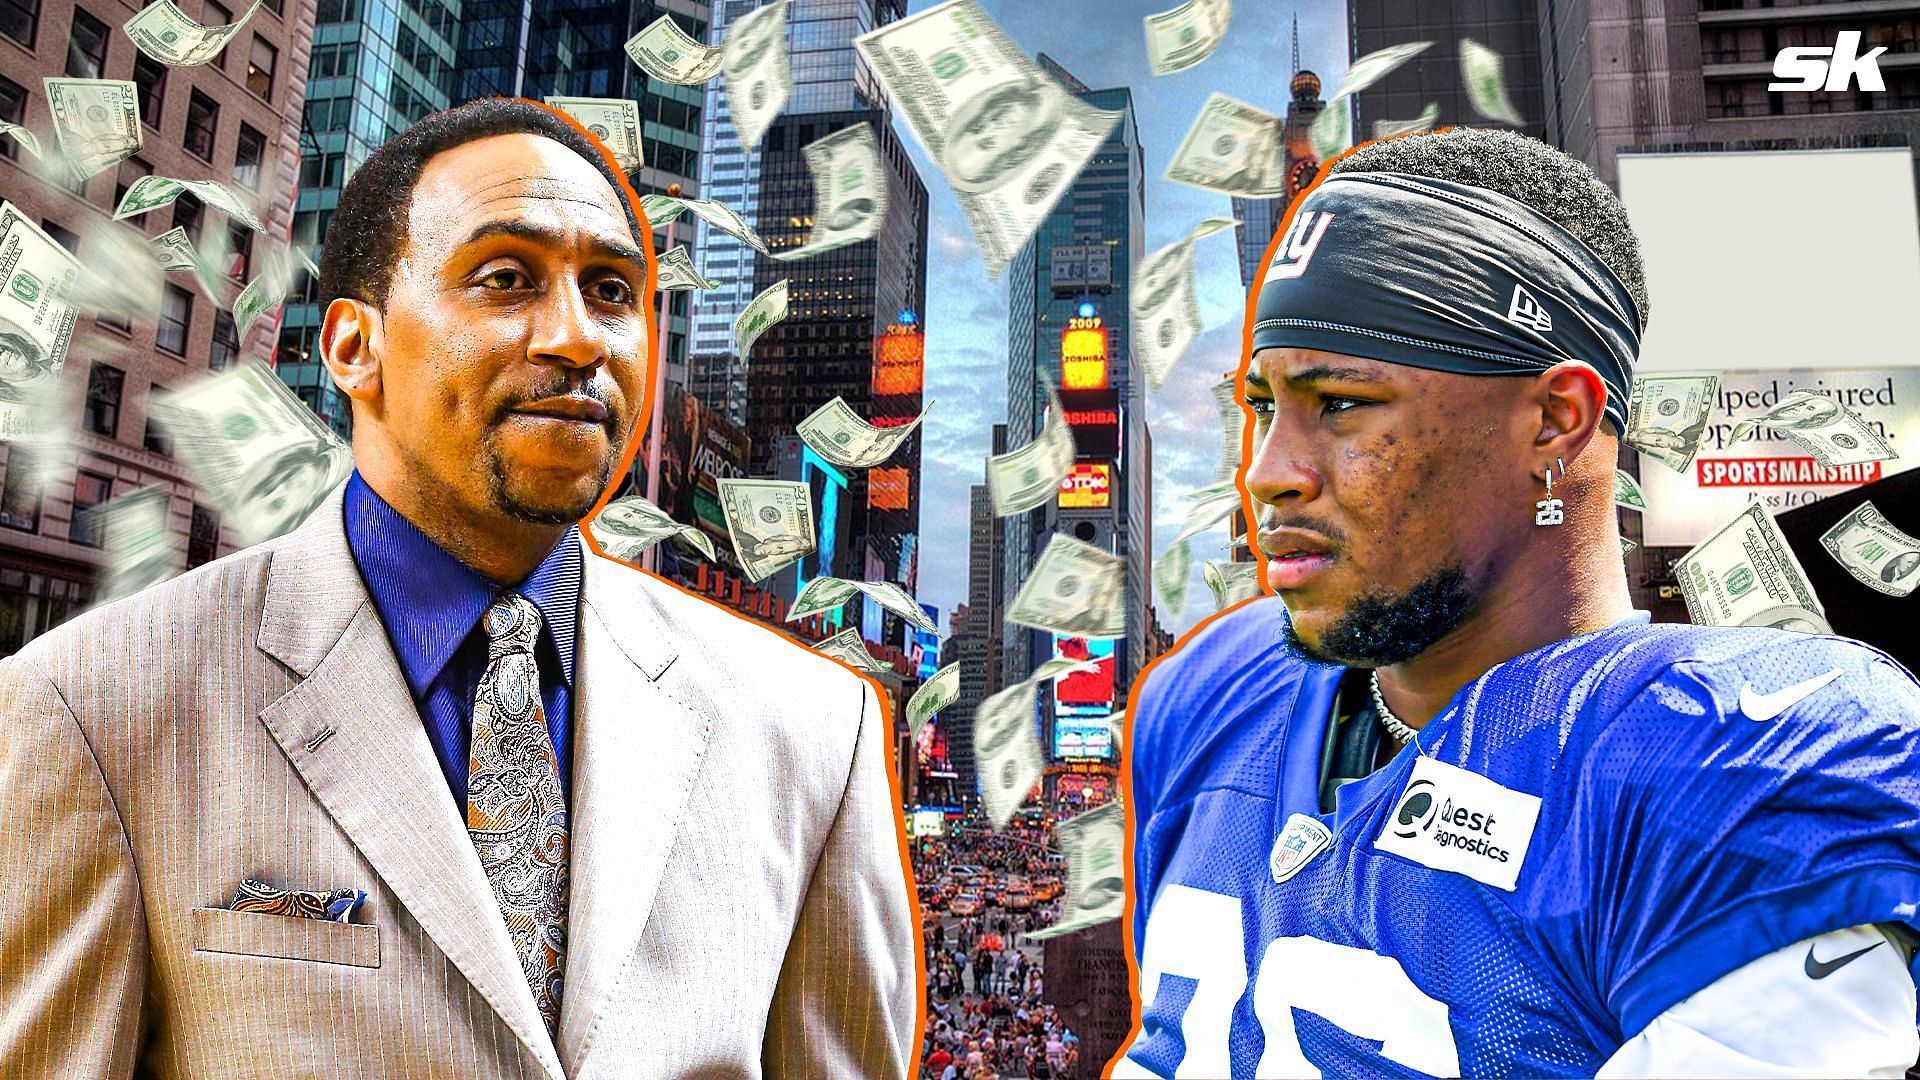 Saquon Barkley gets backing from Stephen A. Smith